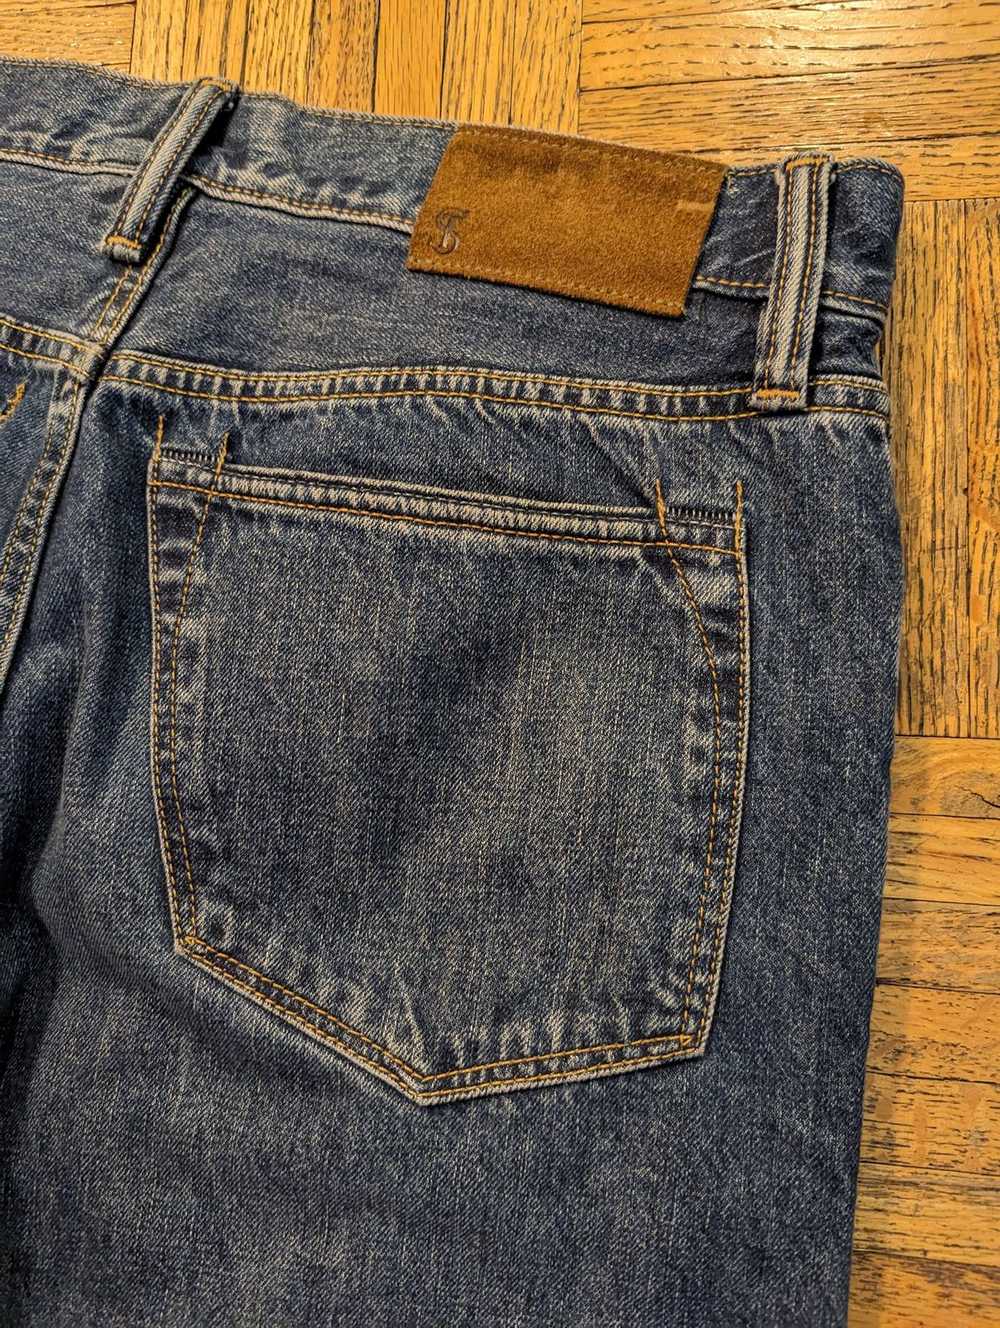 Todd Snyder Selvedge jeans - image 12